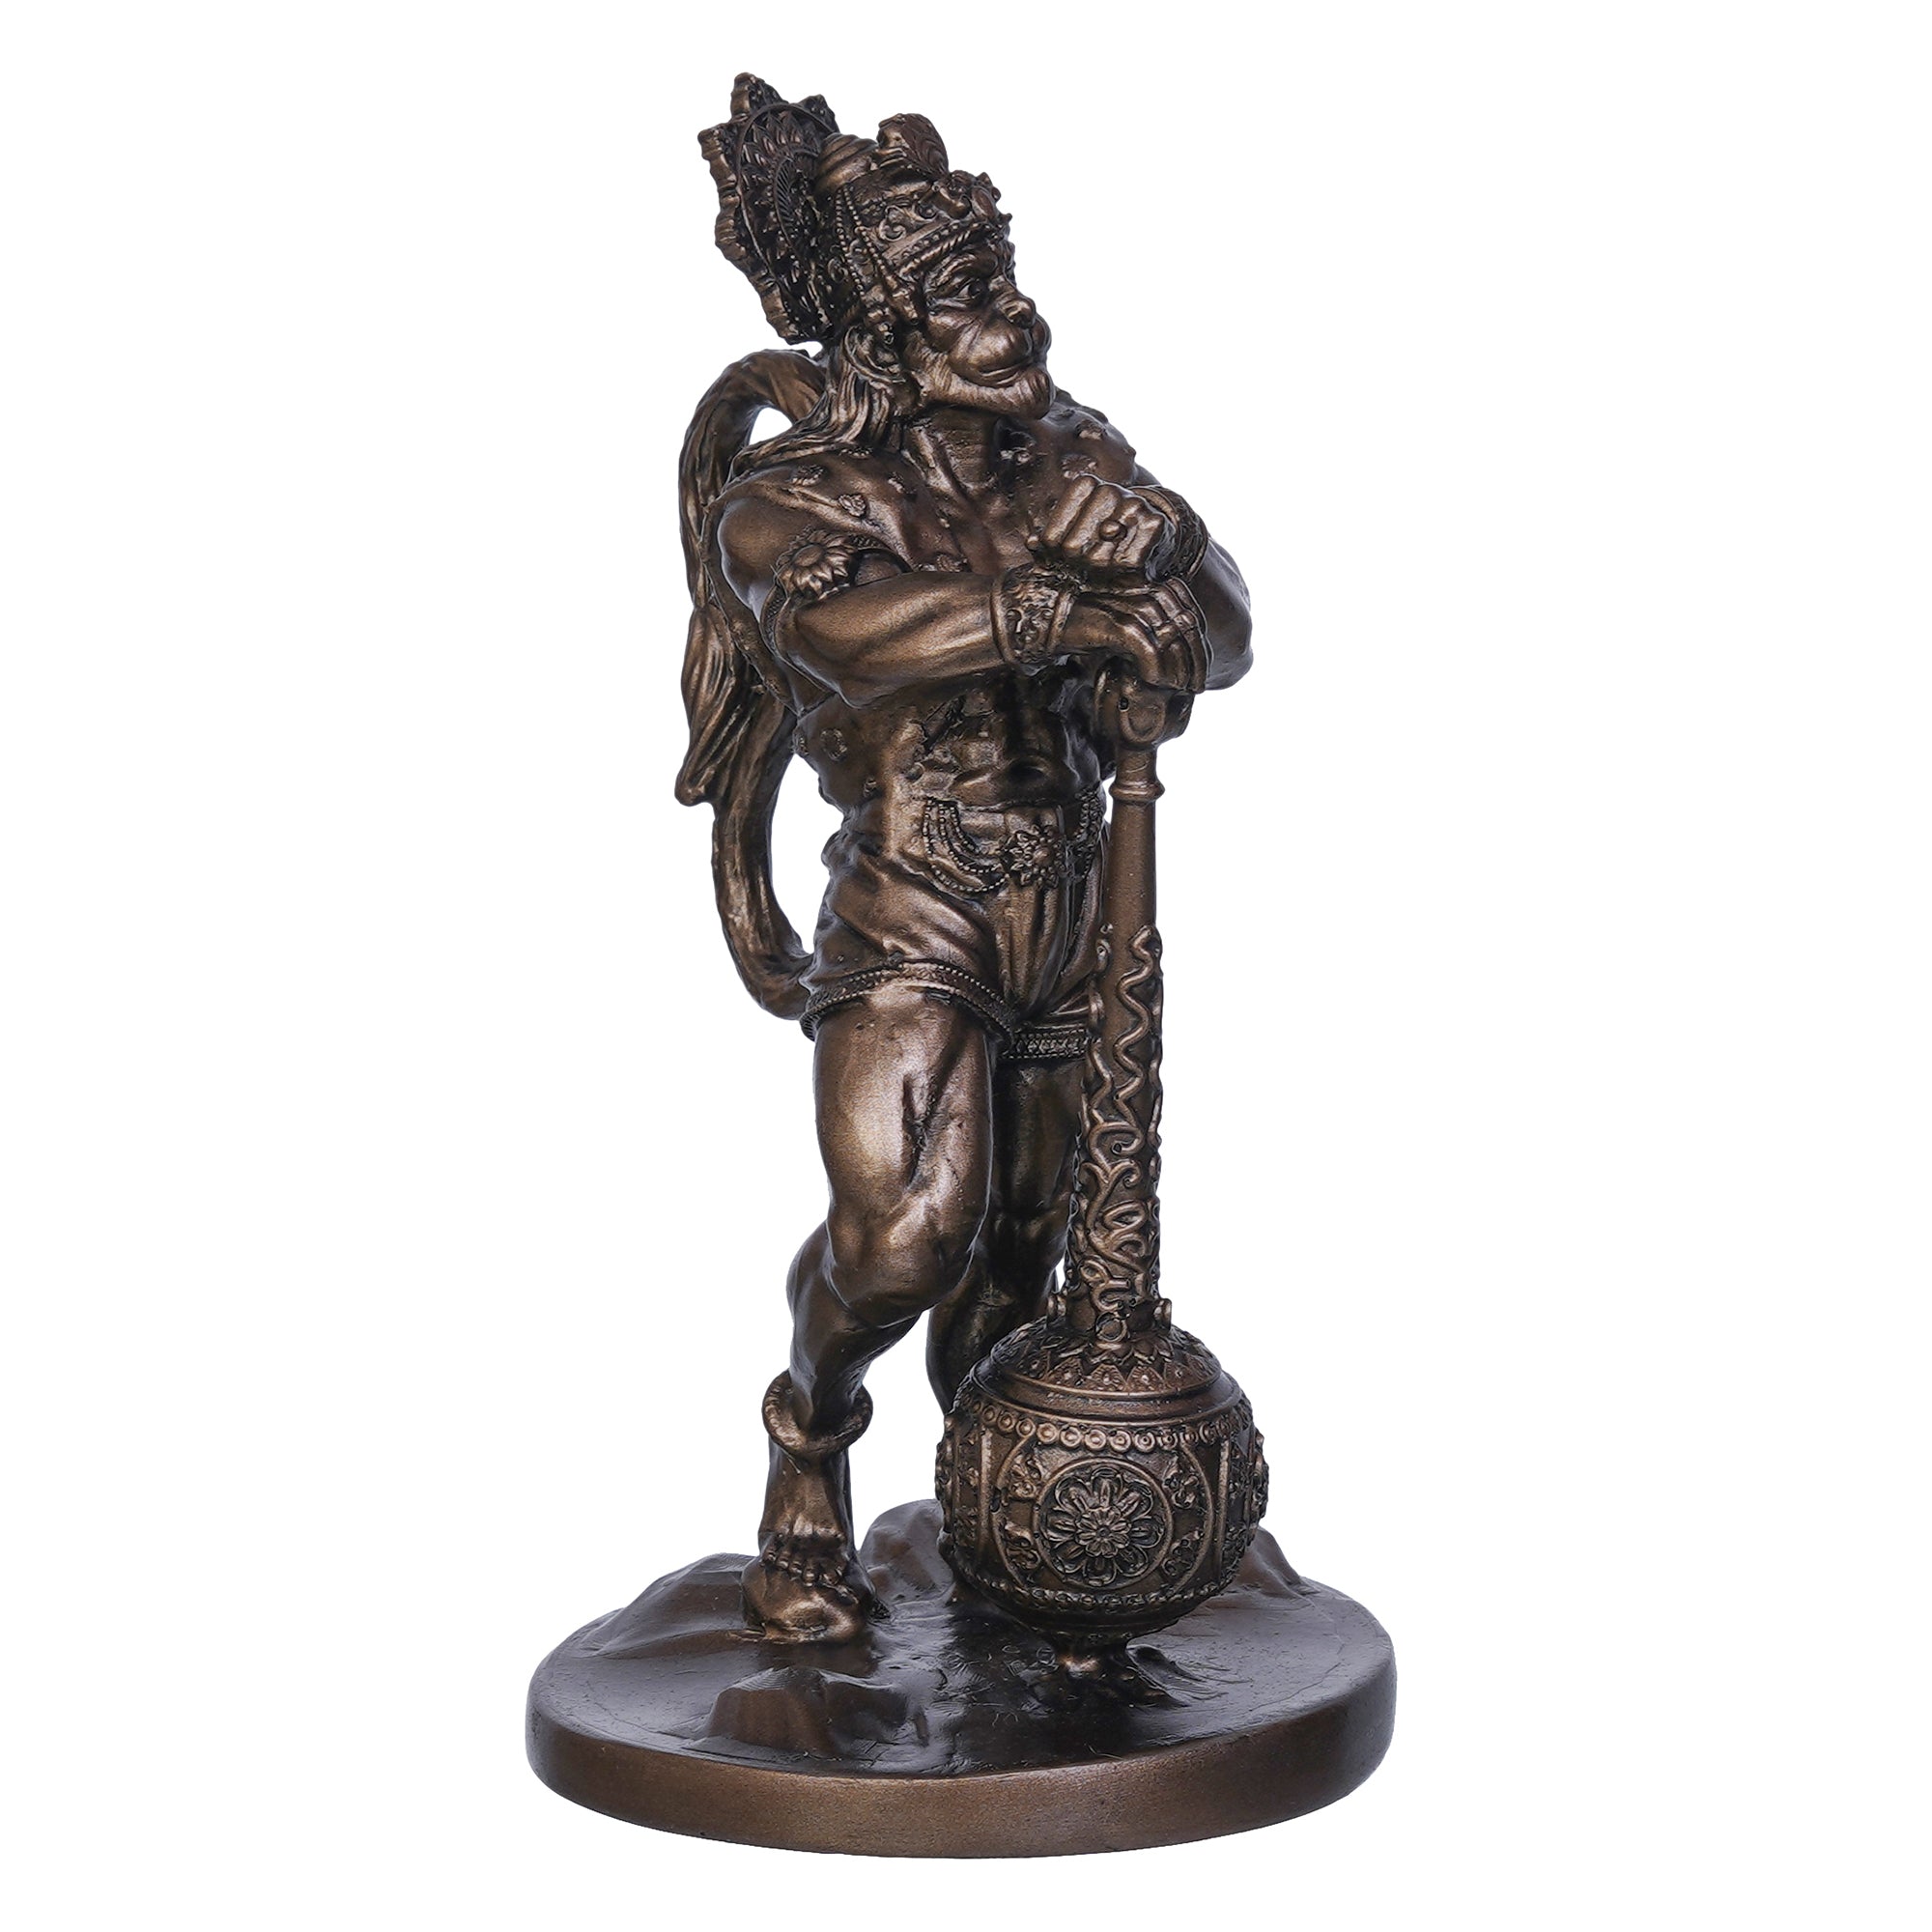 Golden Polyresin Handcrafted Standing Lord Hanuman Statue with Gada/Mace 6